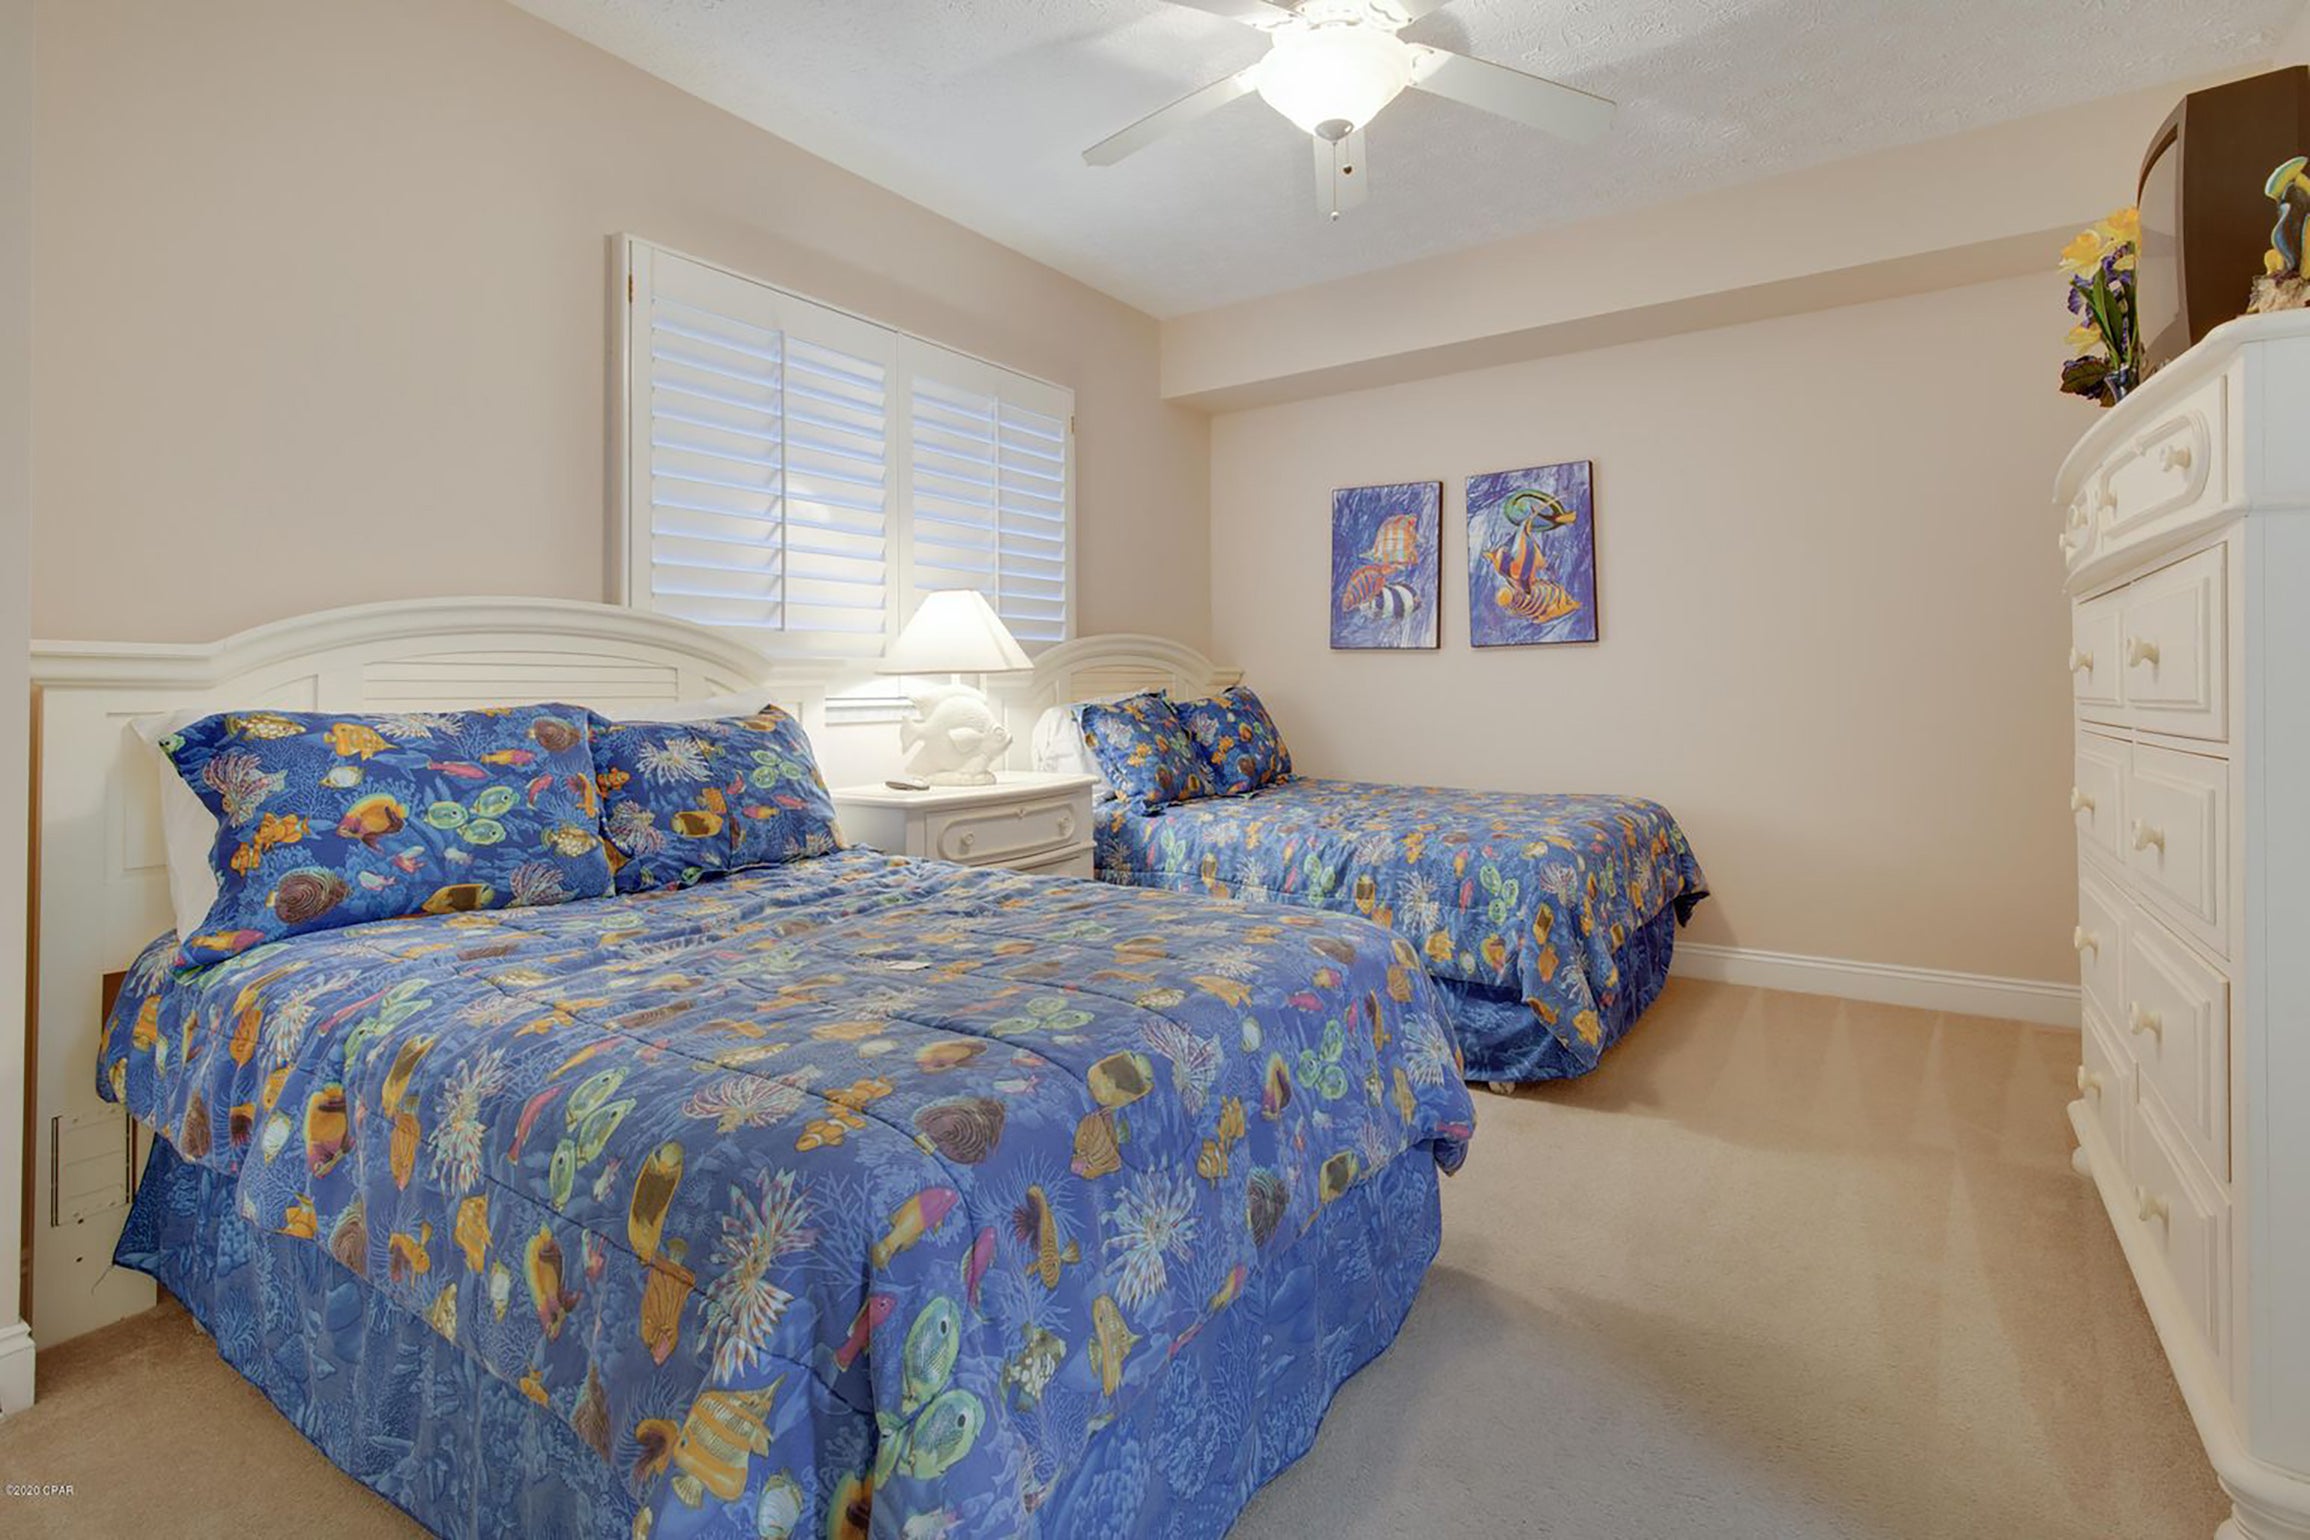 Guest bedroom with two beds